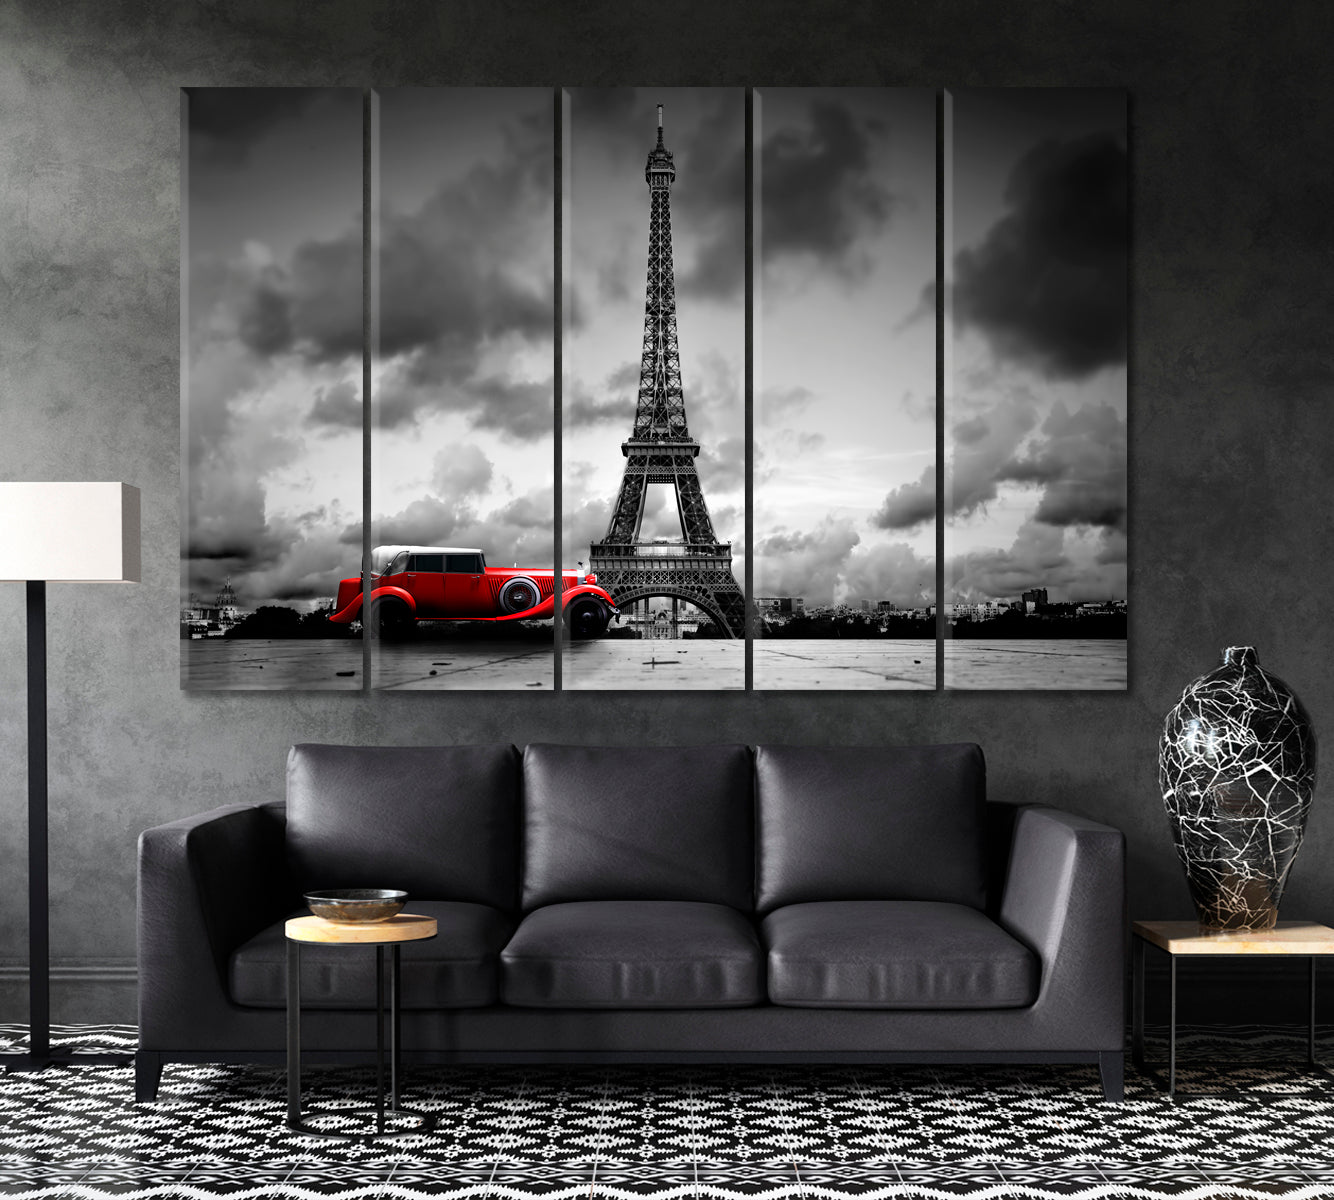 Eiffel Tower Paris France Red Retro Car Black and White Vintage Artistic Black and White Wall Art Print Artesty 5 panels 36" x 24" 